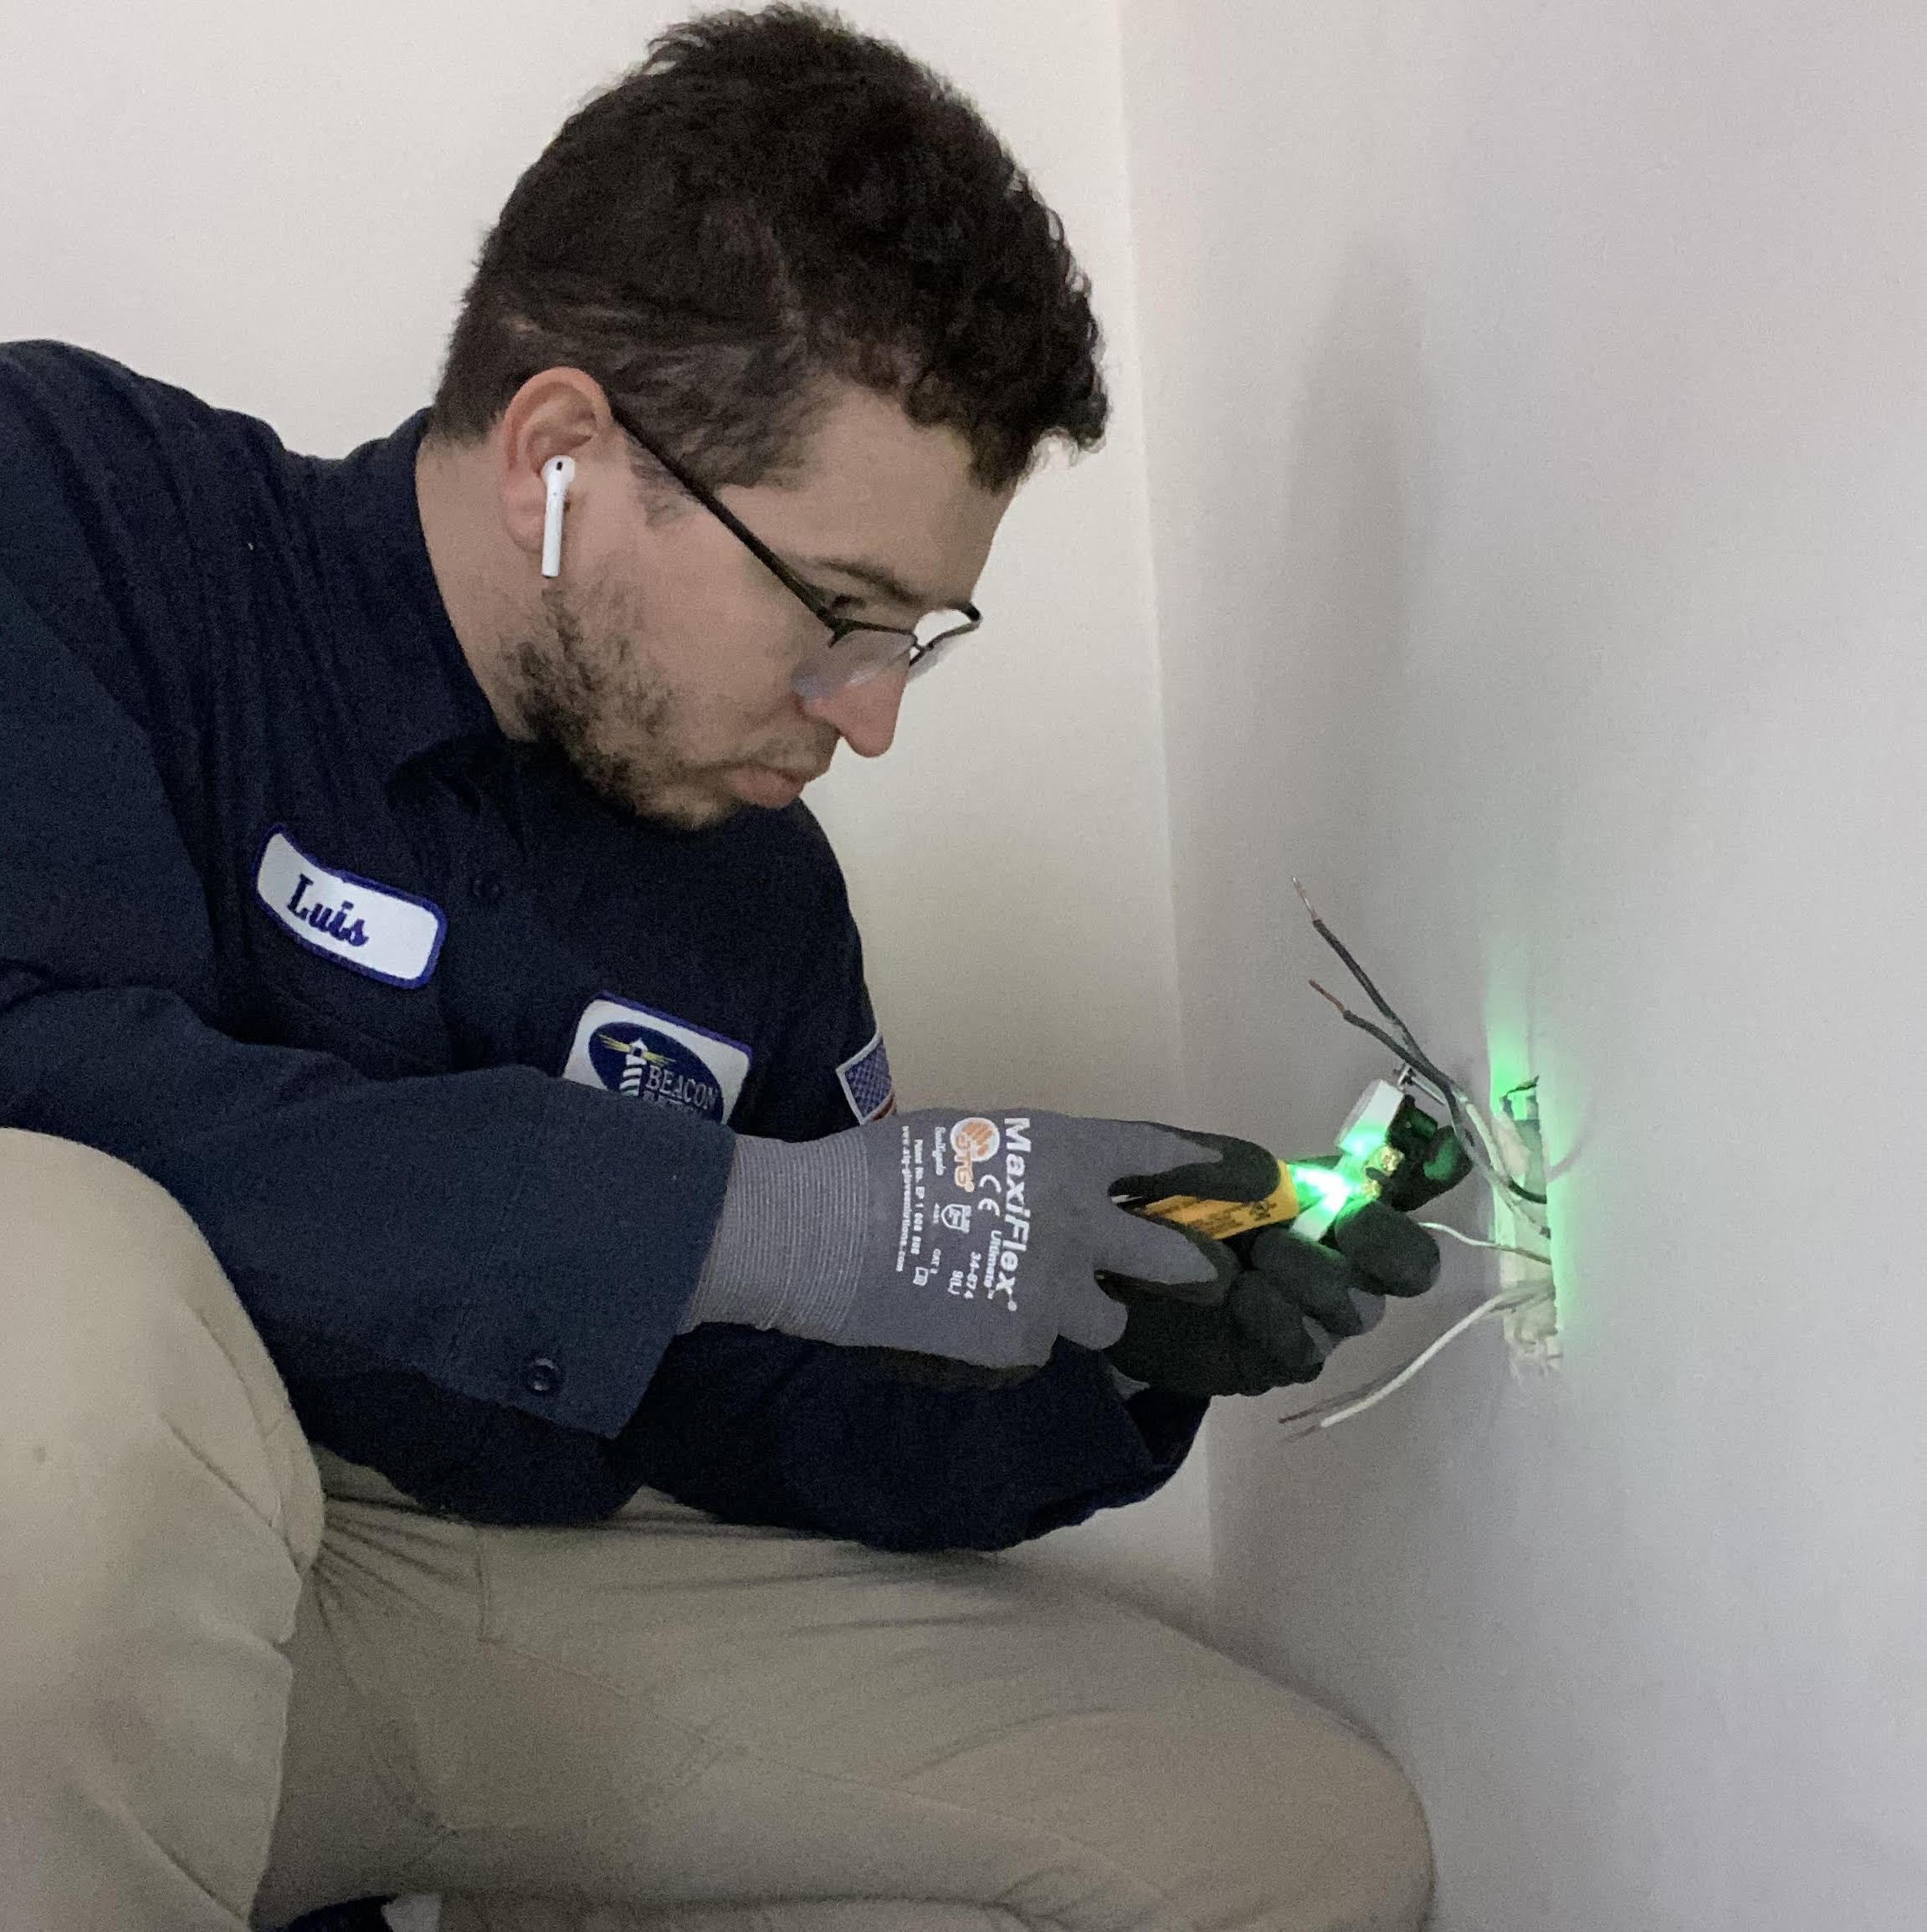 electrician fixing outlet